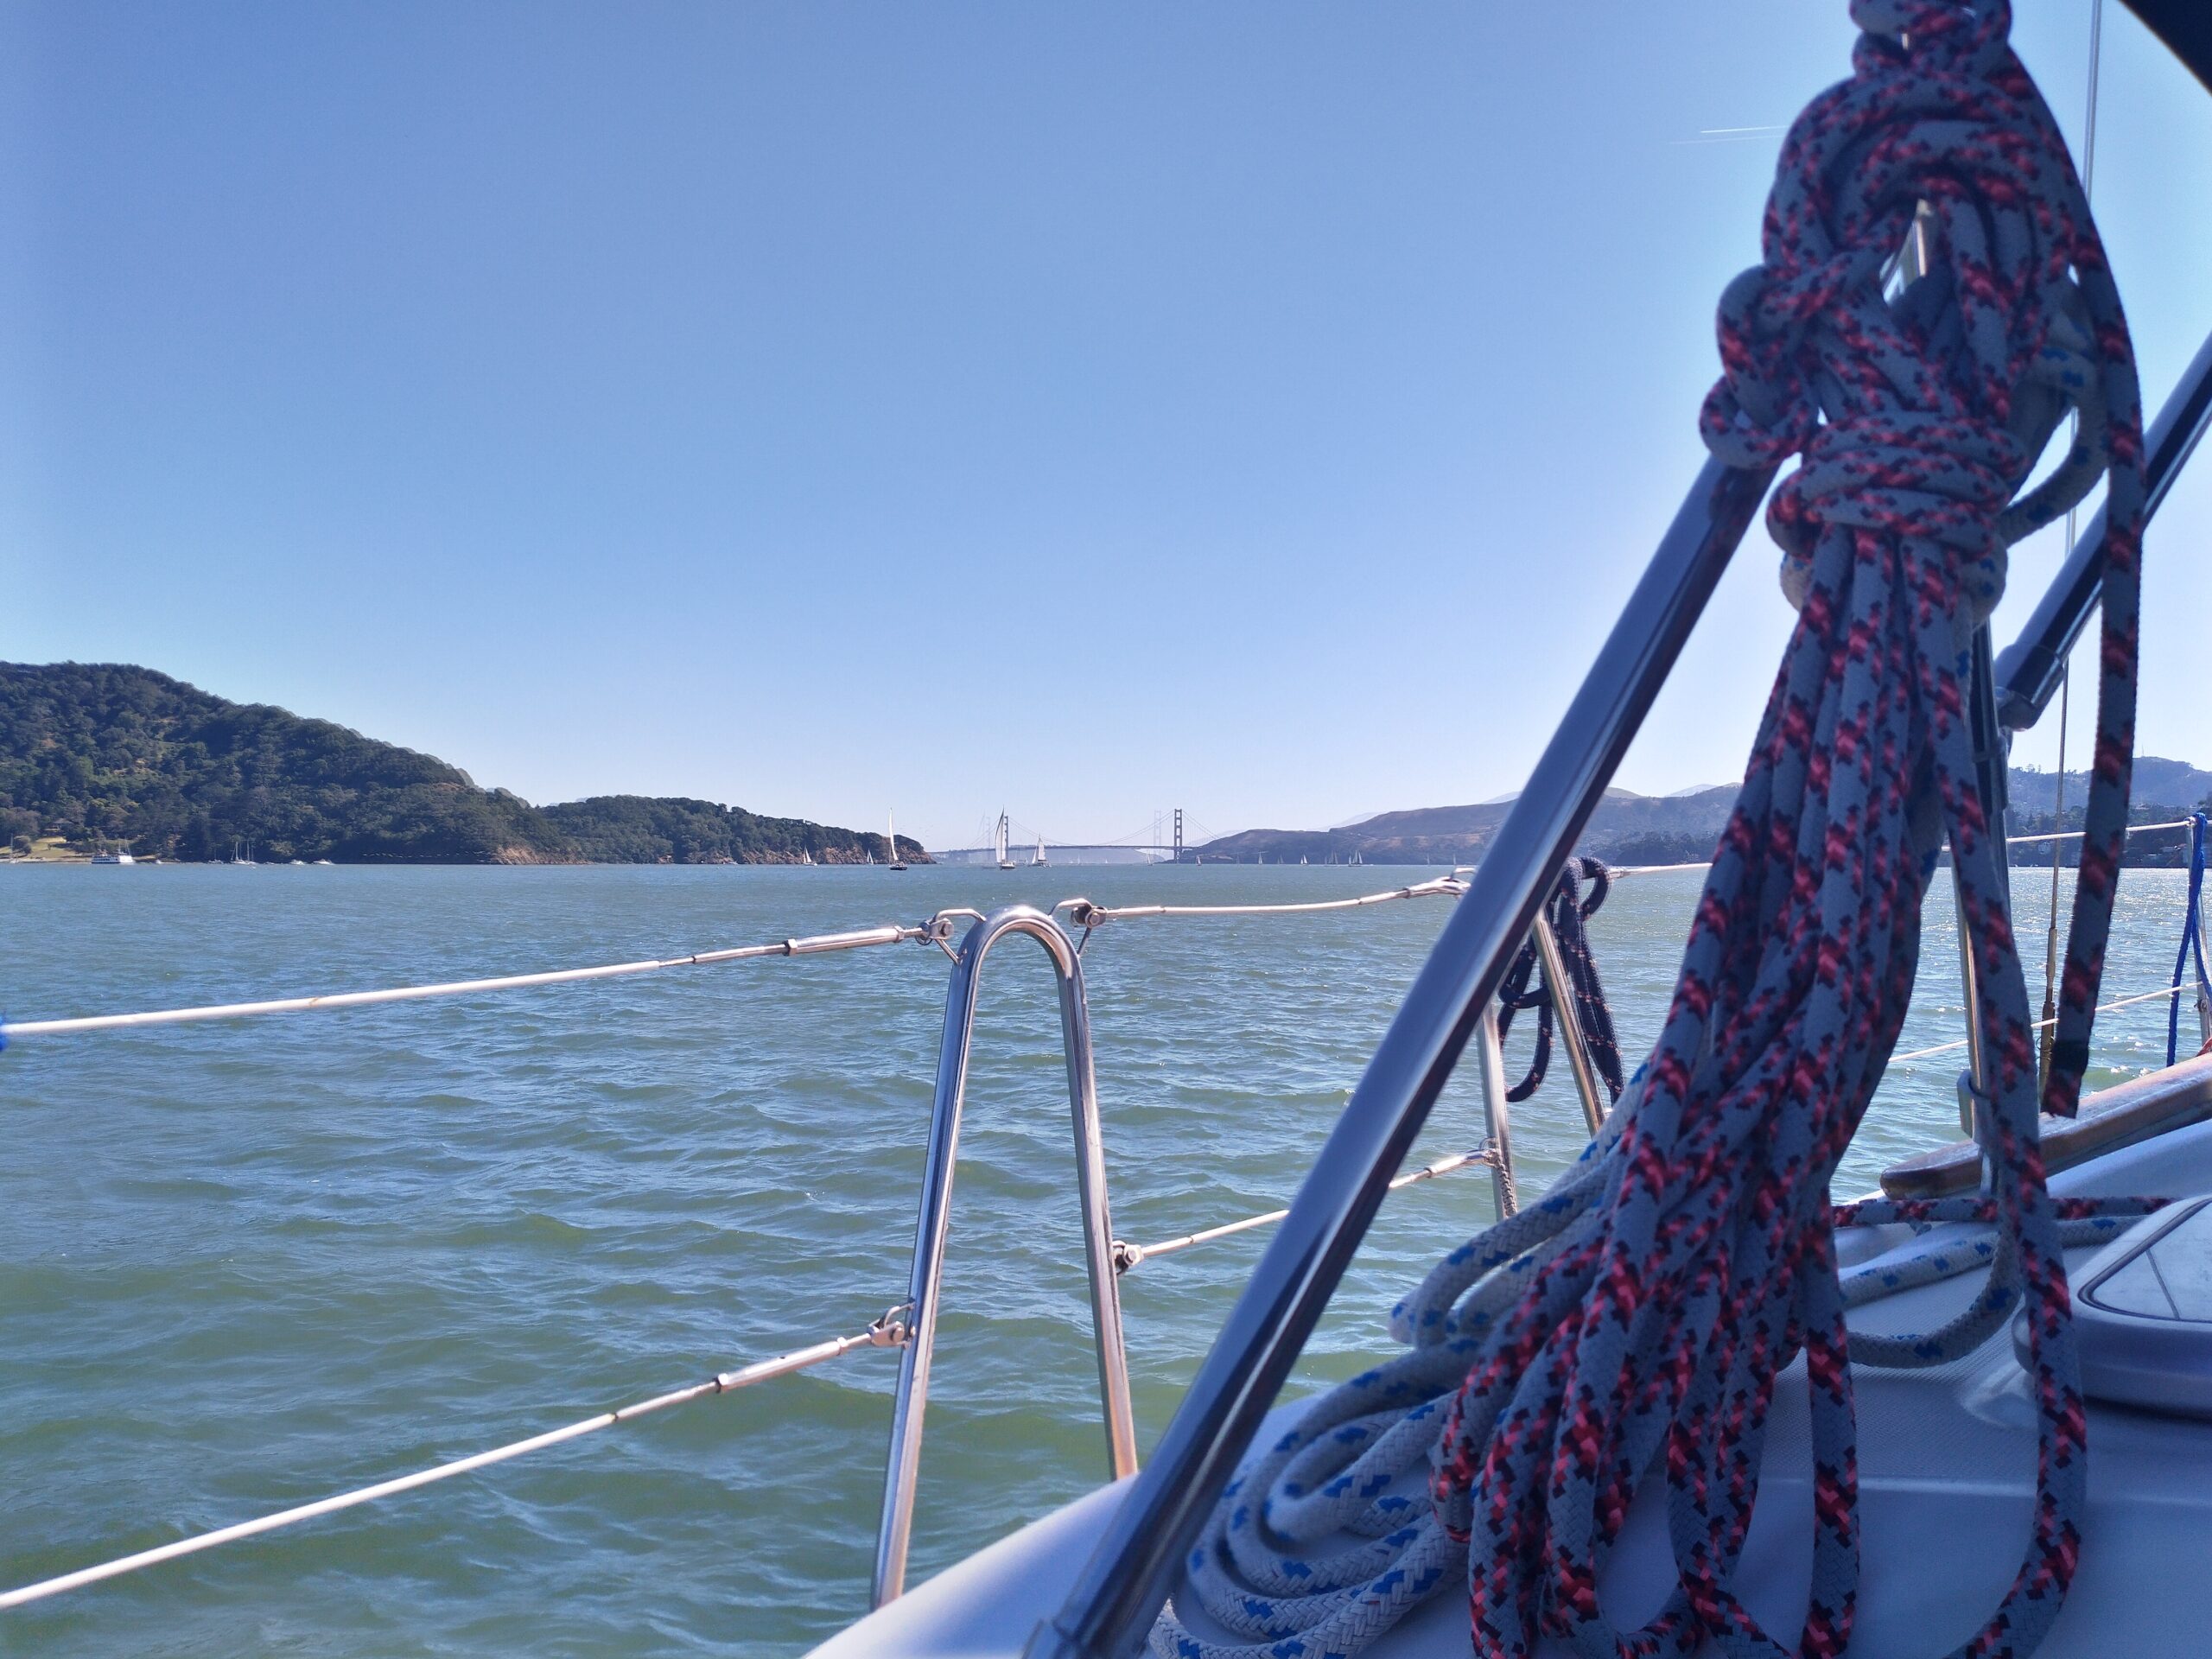 the san francisco bay, as seen from a boat